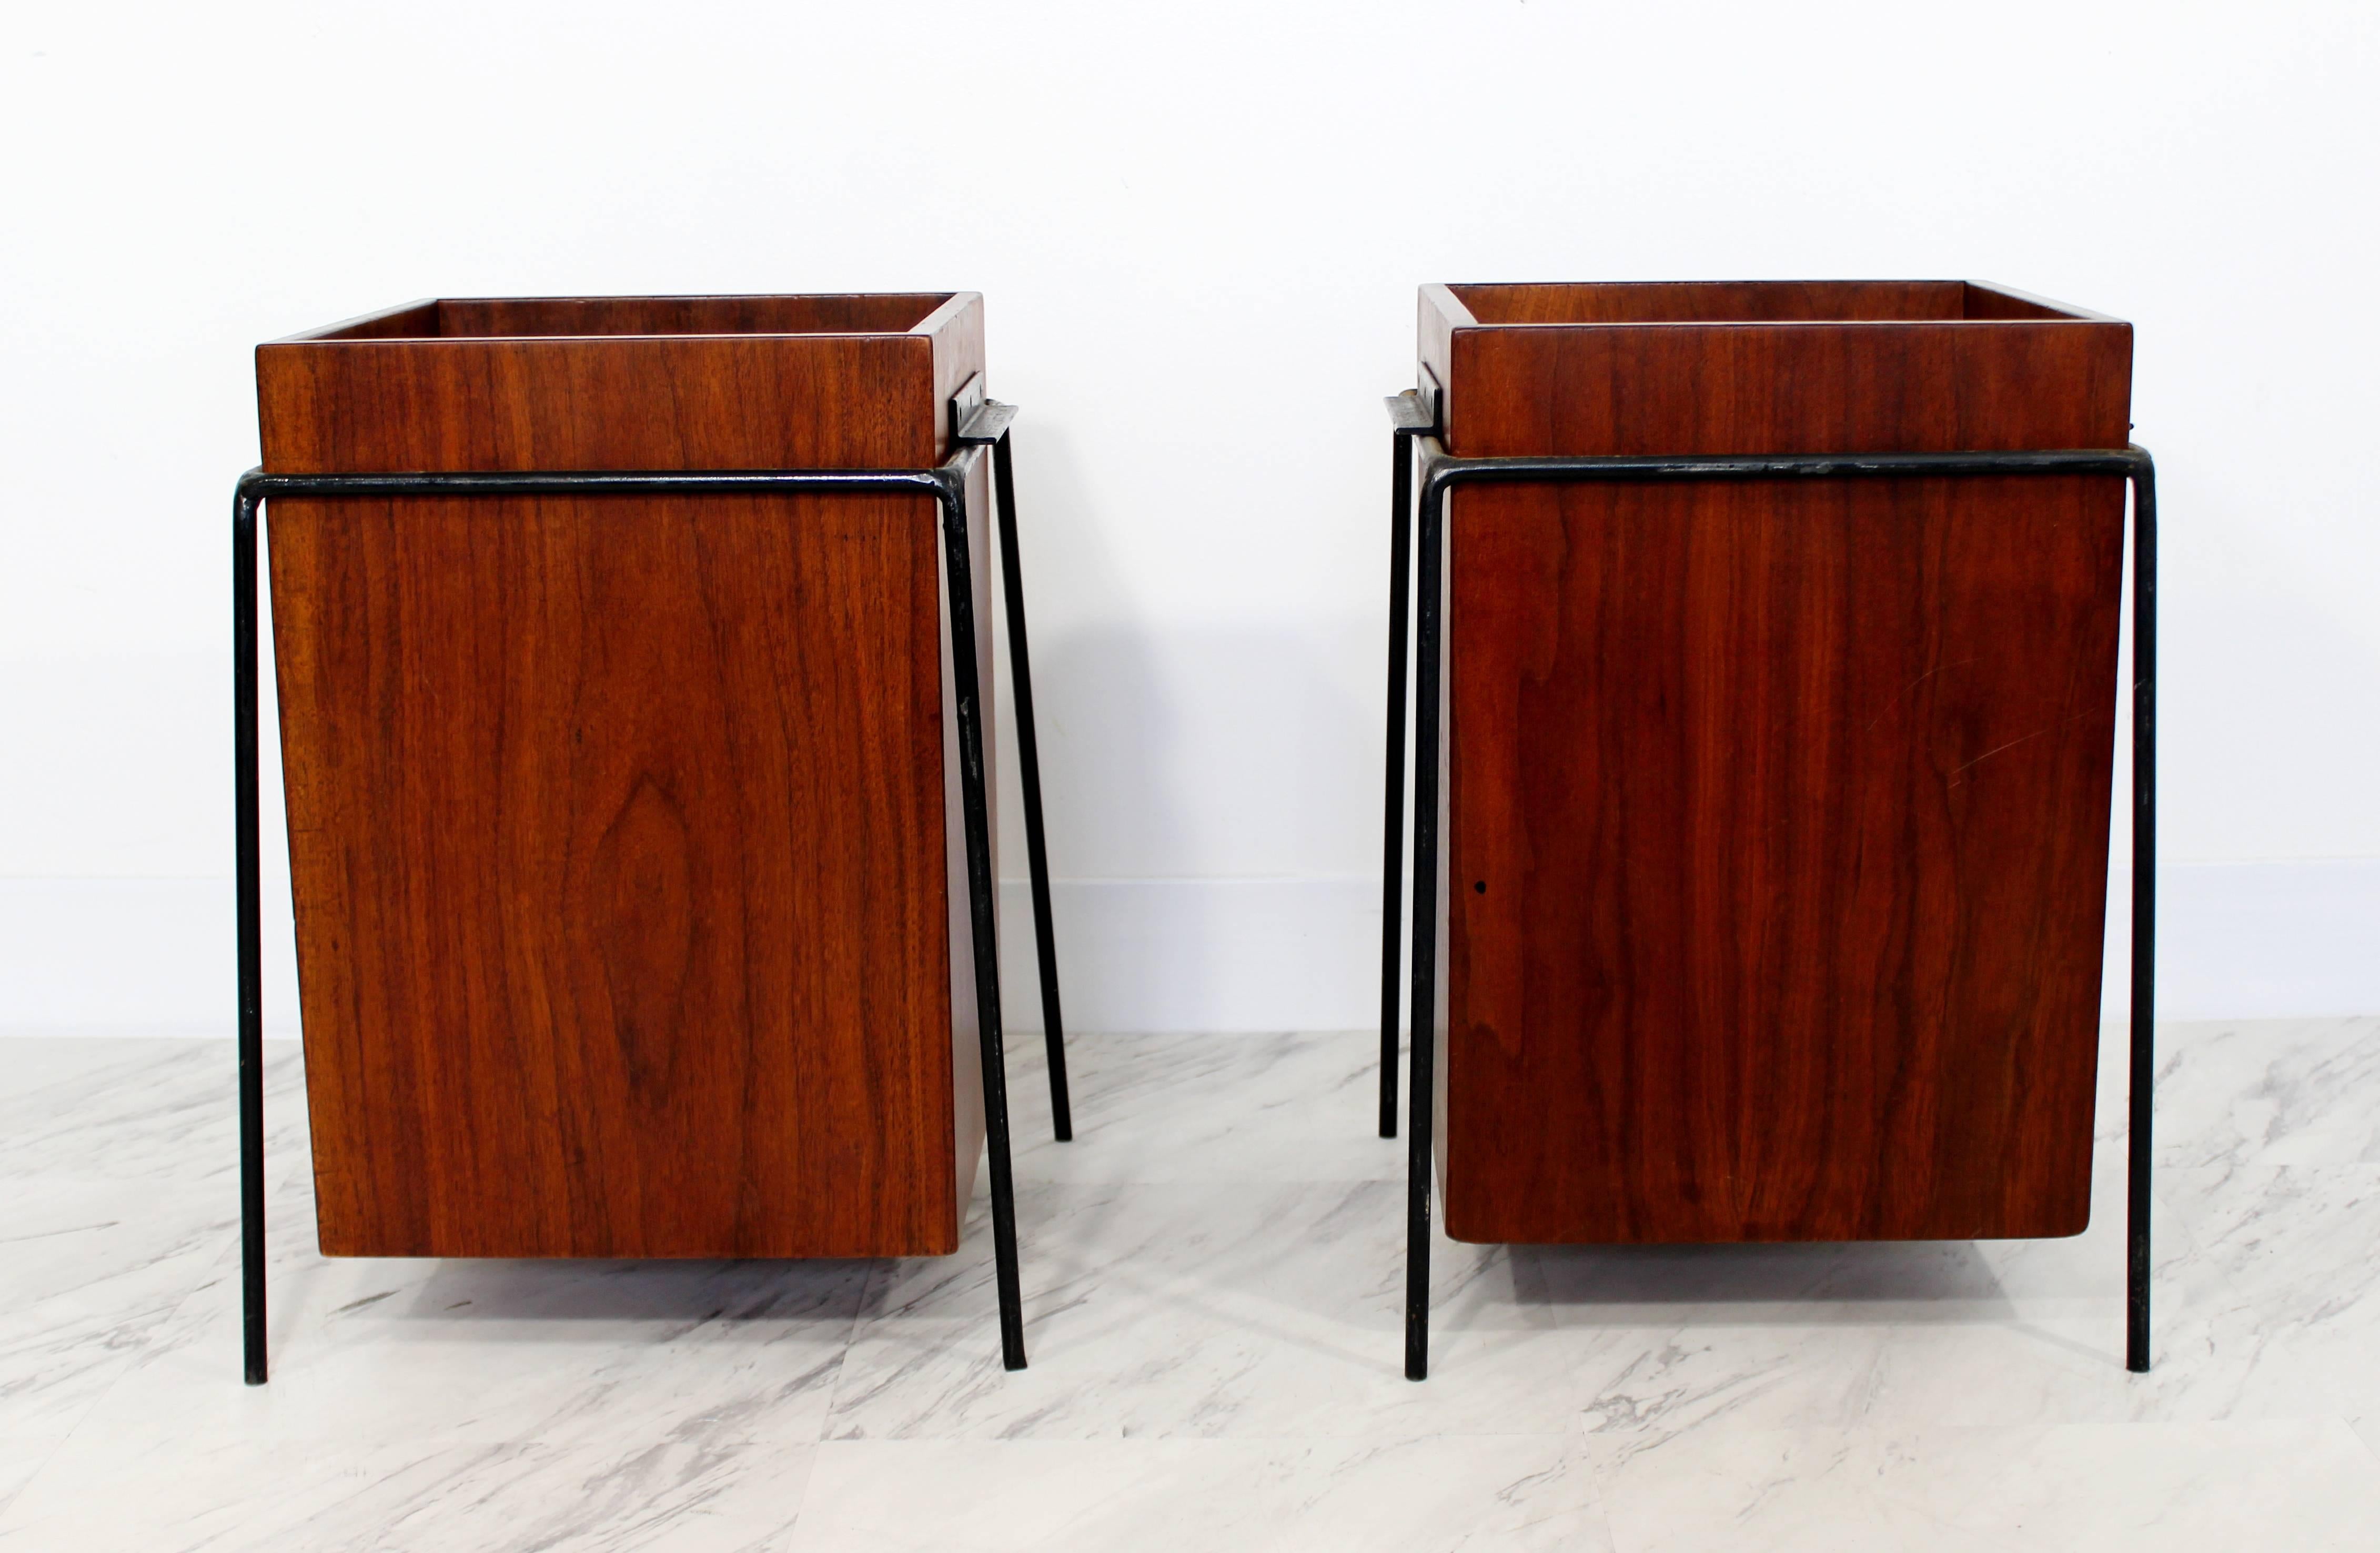 For your consideration is a gorgeous pair of suspended walnut trash cans, on iron frames, by Alvin Lustig. These were custom-made for the executive offices of JL Hudson. This posting is for 1 trash can, 2 are available. In excellent condition. The